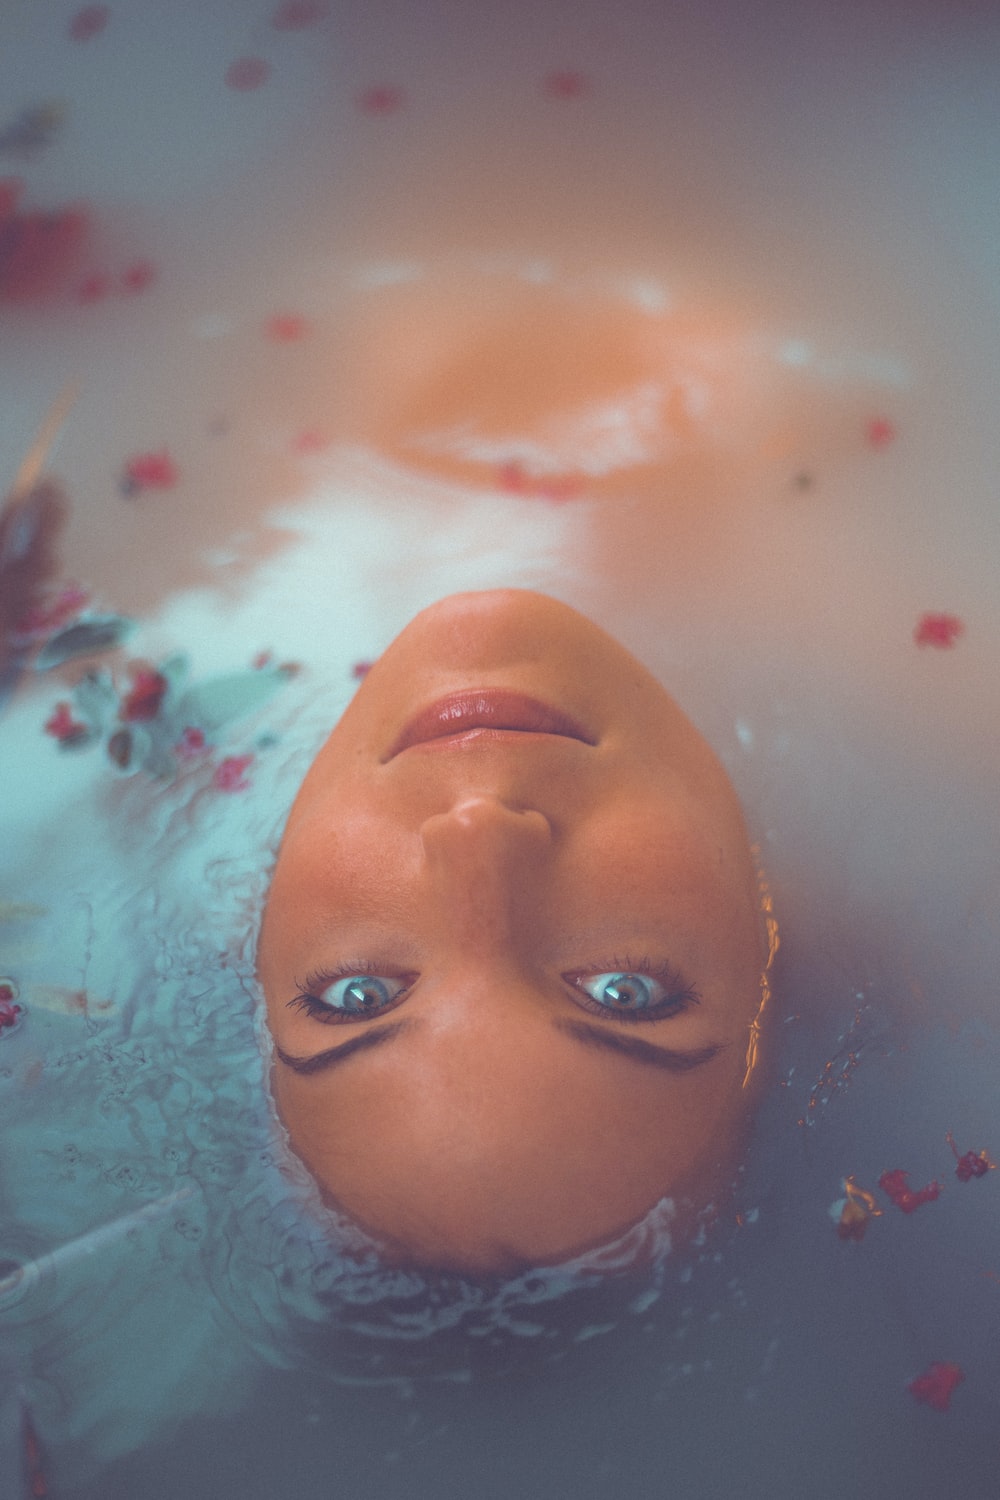 Face In Water Picture. Download Free Image